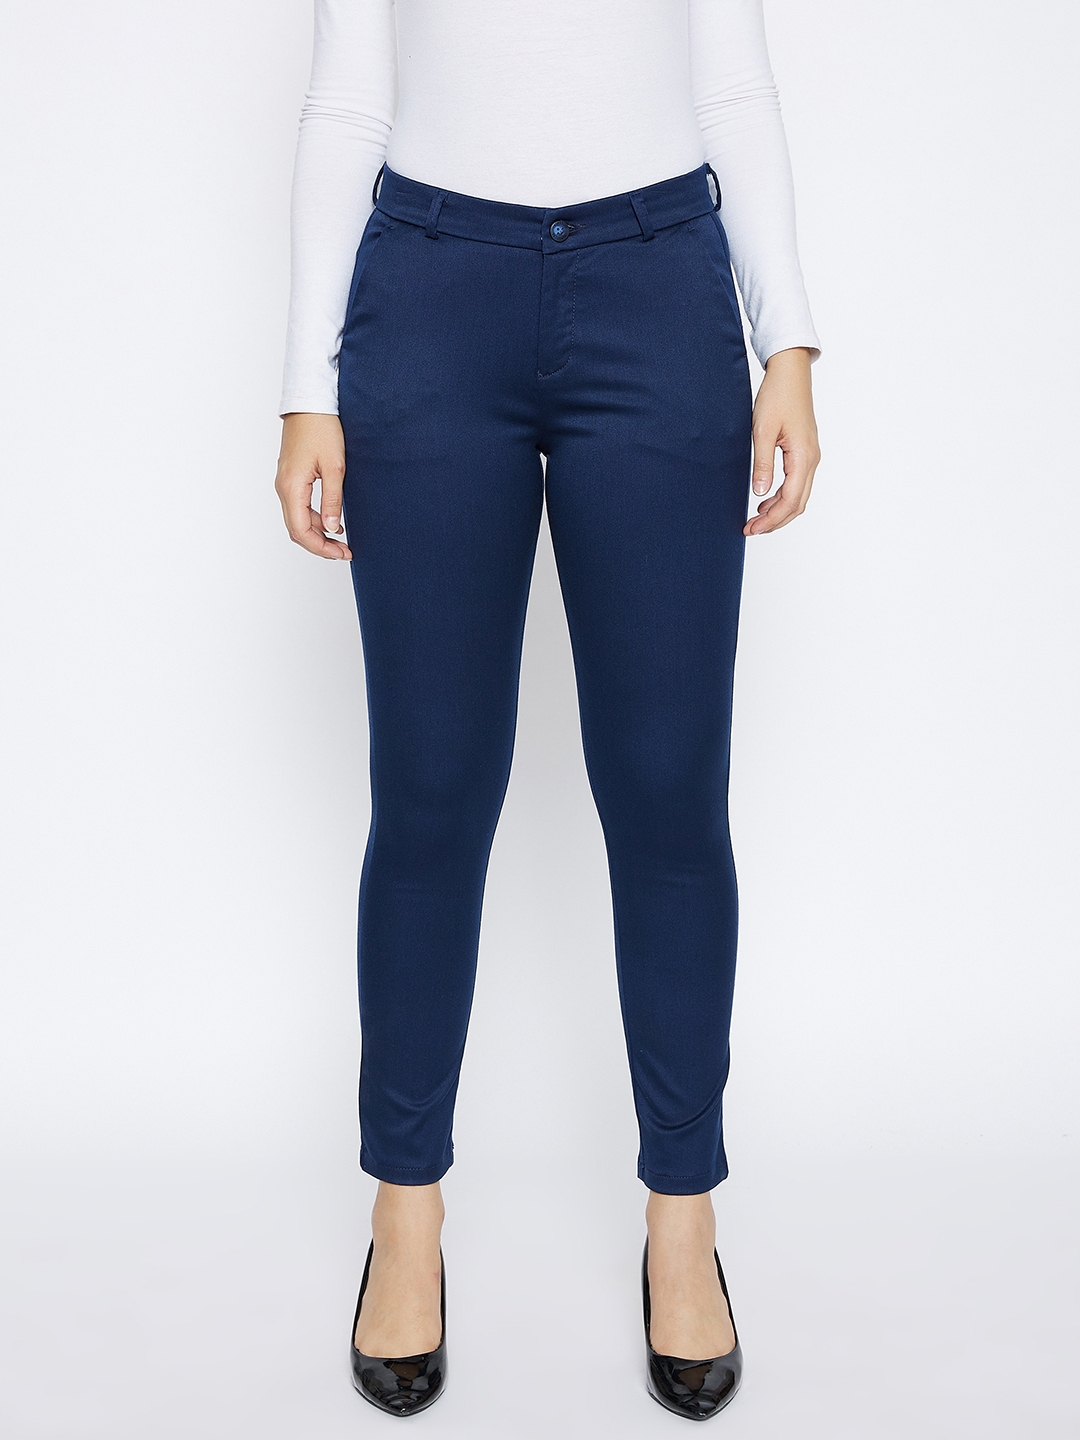 CRIMSOUNE CLUB | Navy Blue Solid Trousers